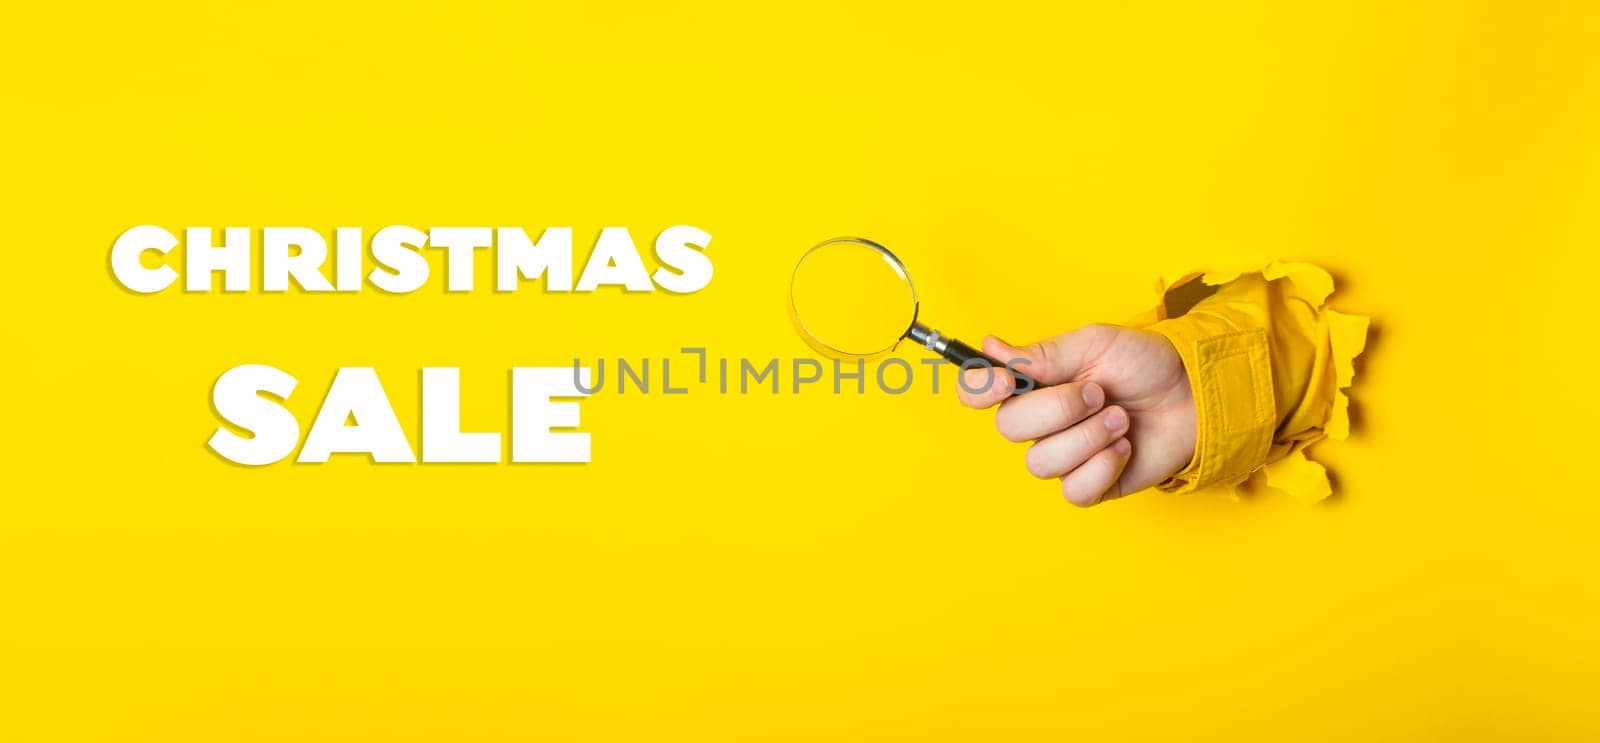 A person holding a magnifying glass with the words Christmas Sale written below. The image has a festive and playful mood